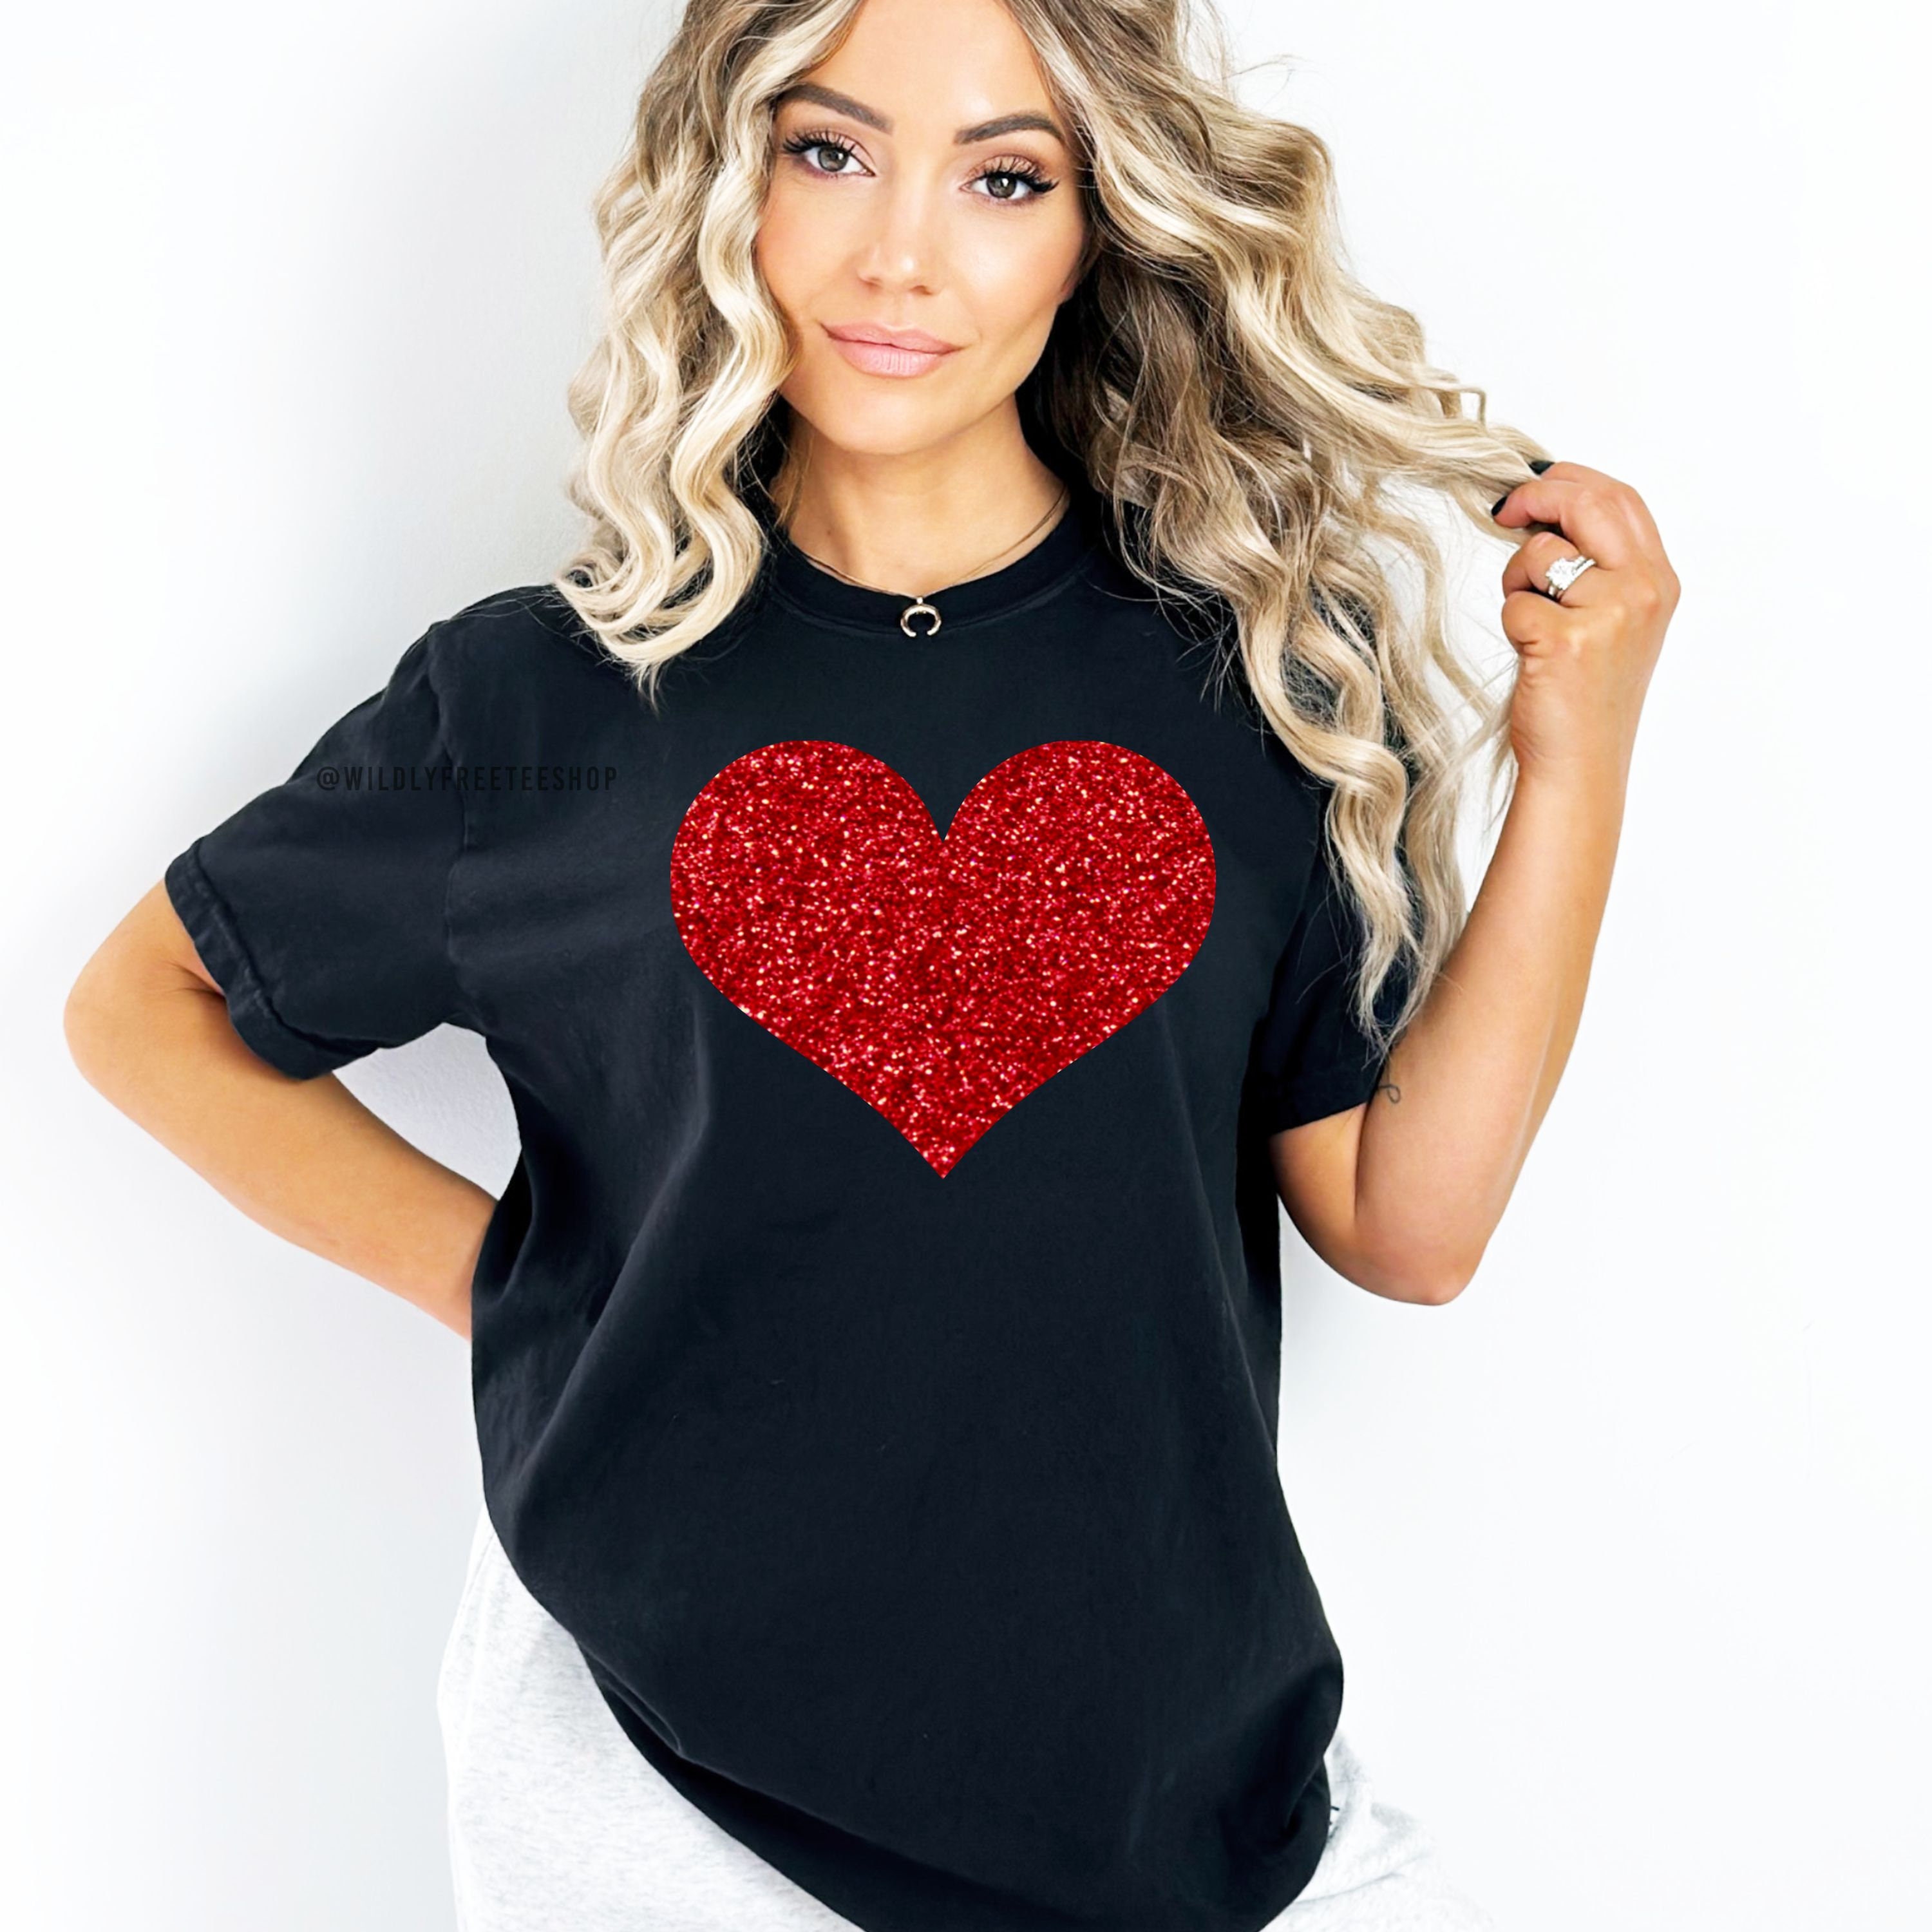 Amtdh Womens Shirts Plus Size Tops for Women Hearts Graphic Shirts